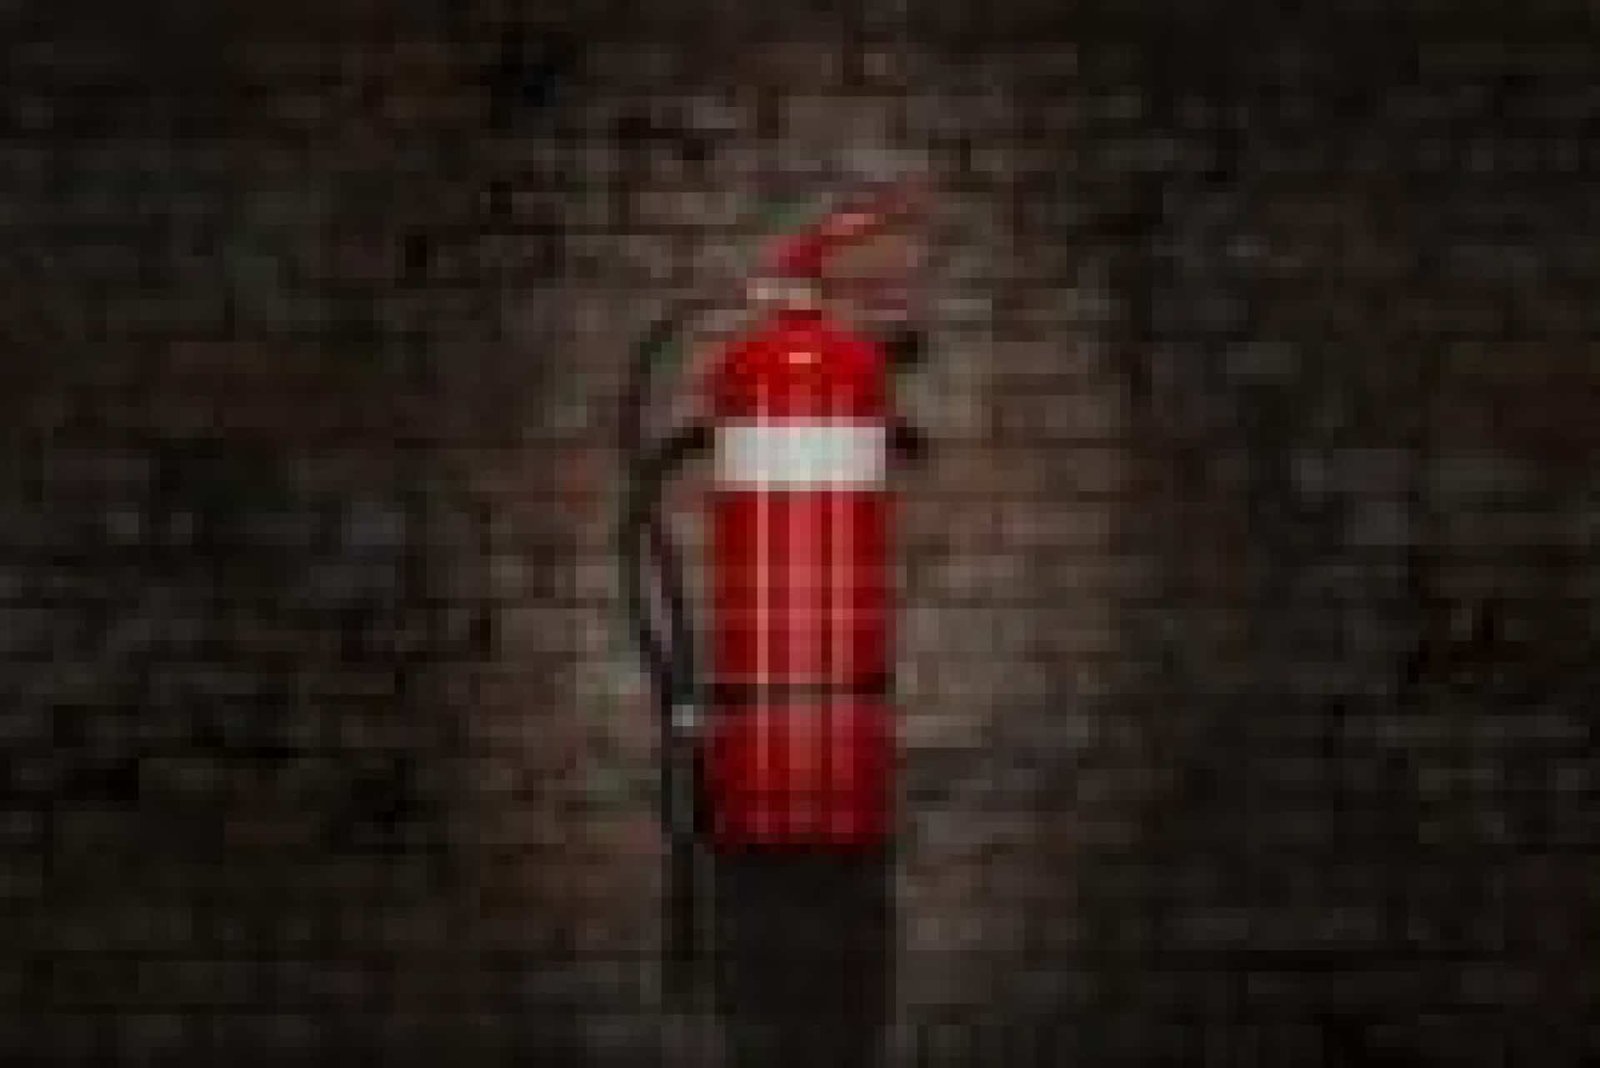 Tips to properly maintain your fire extinguisher